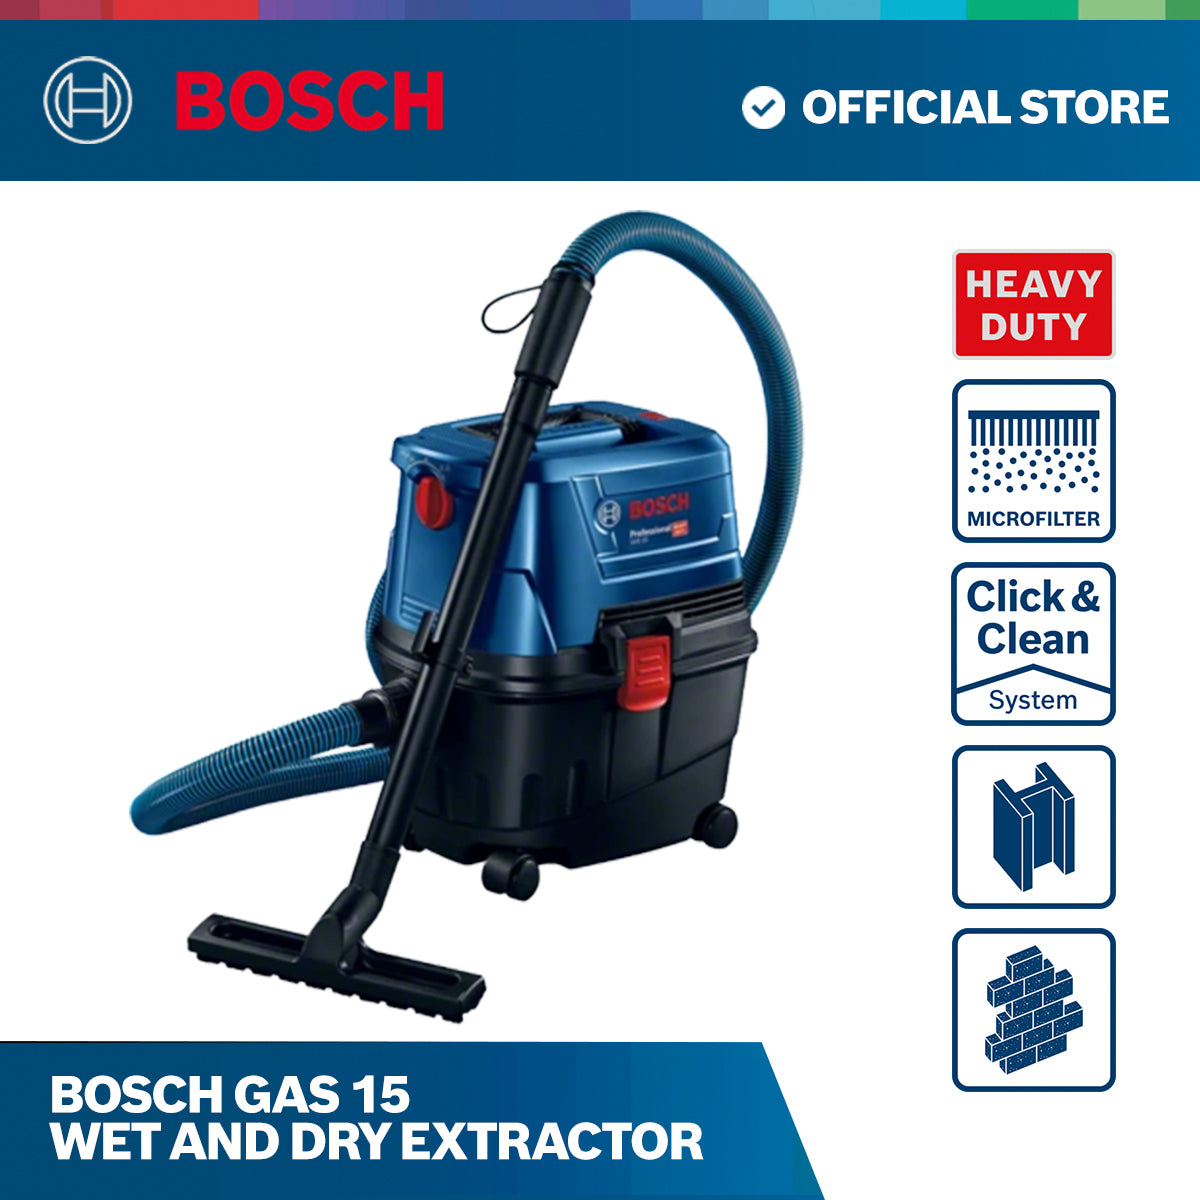  Bosch GAS 18V-1 Professional Cordless Vacuum Cleaner /  Cleaning Performance Redefined! With new rotational airflow technology (  Bare Tool Body Only)